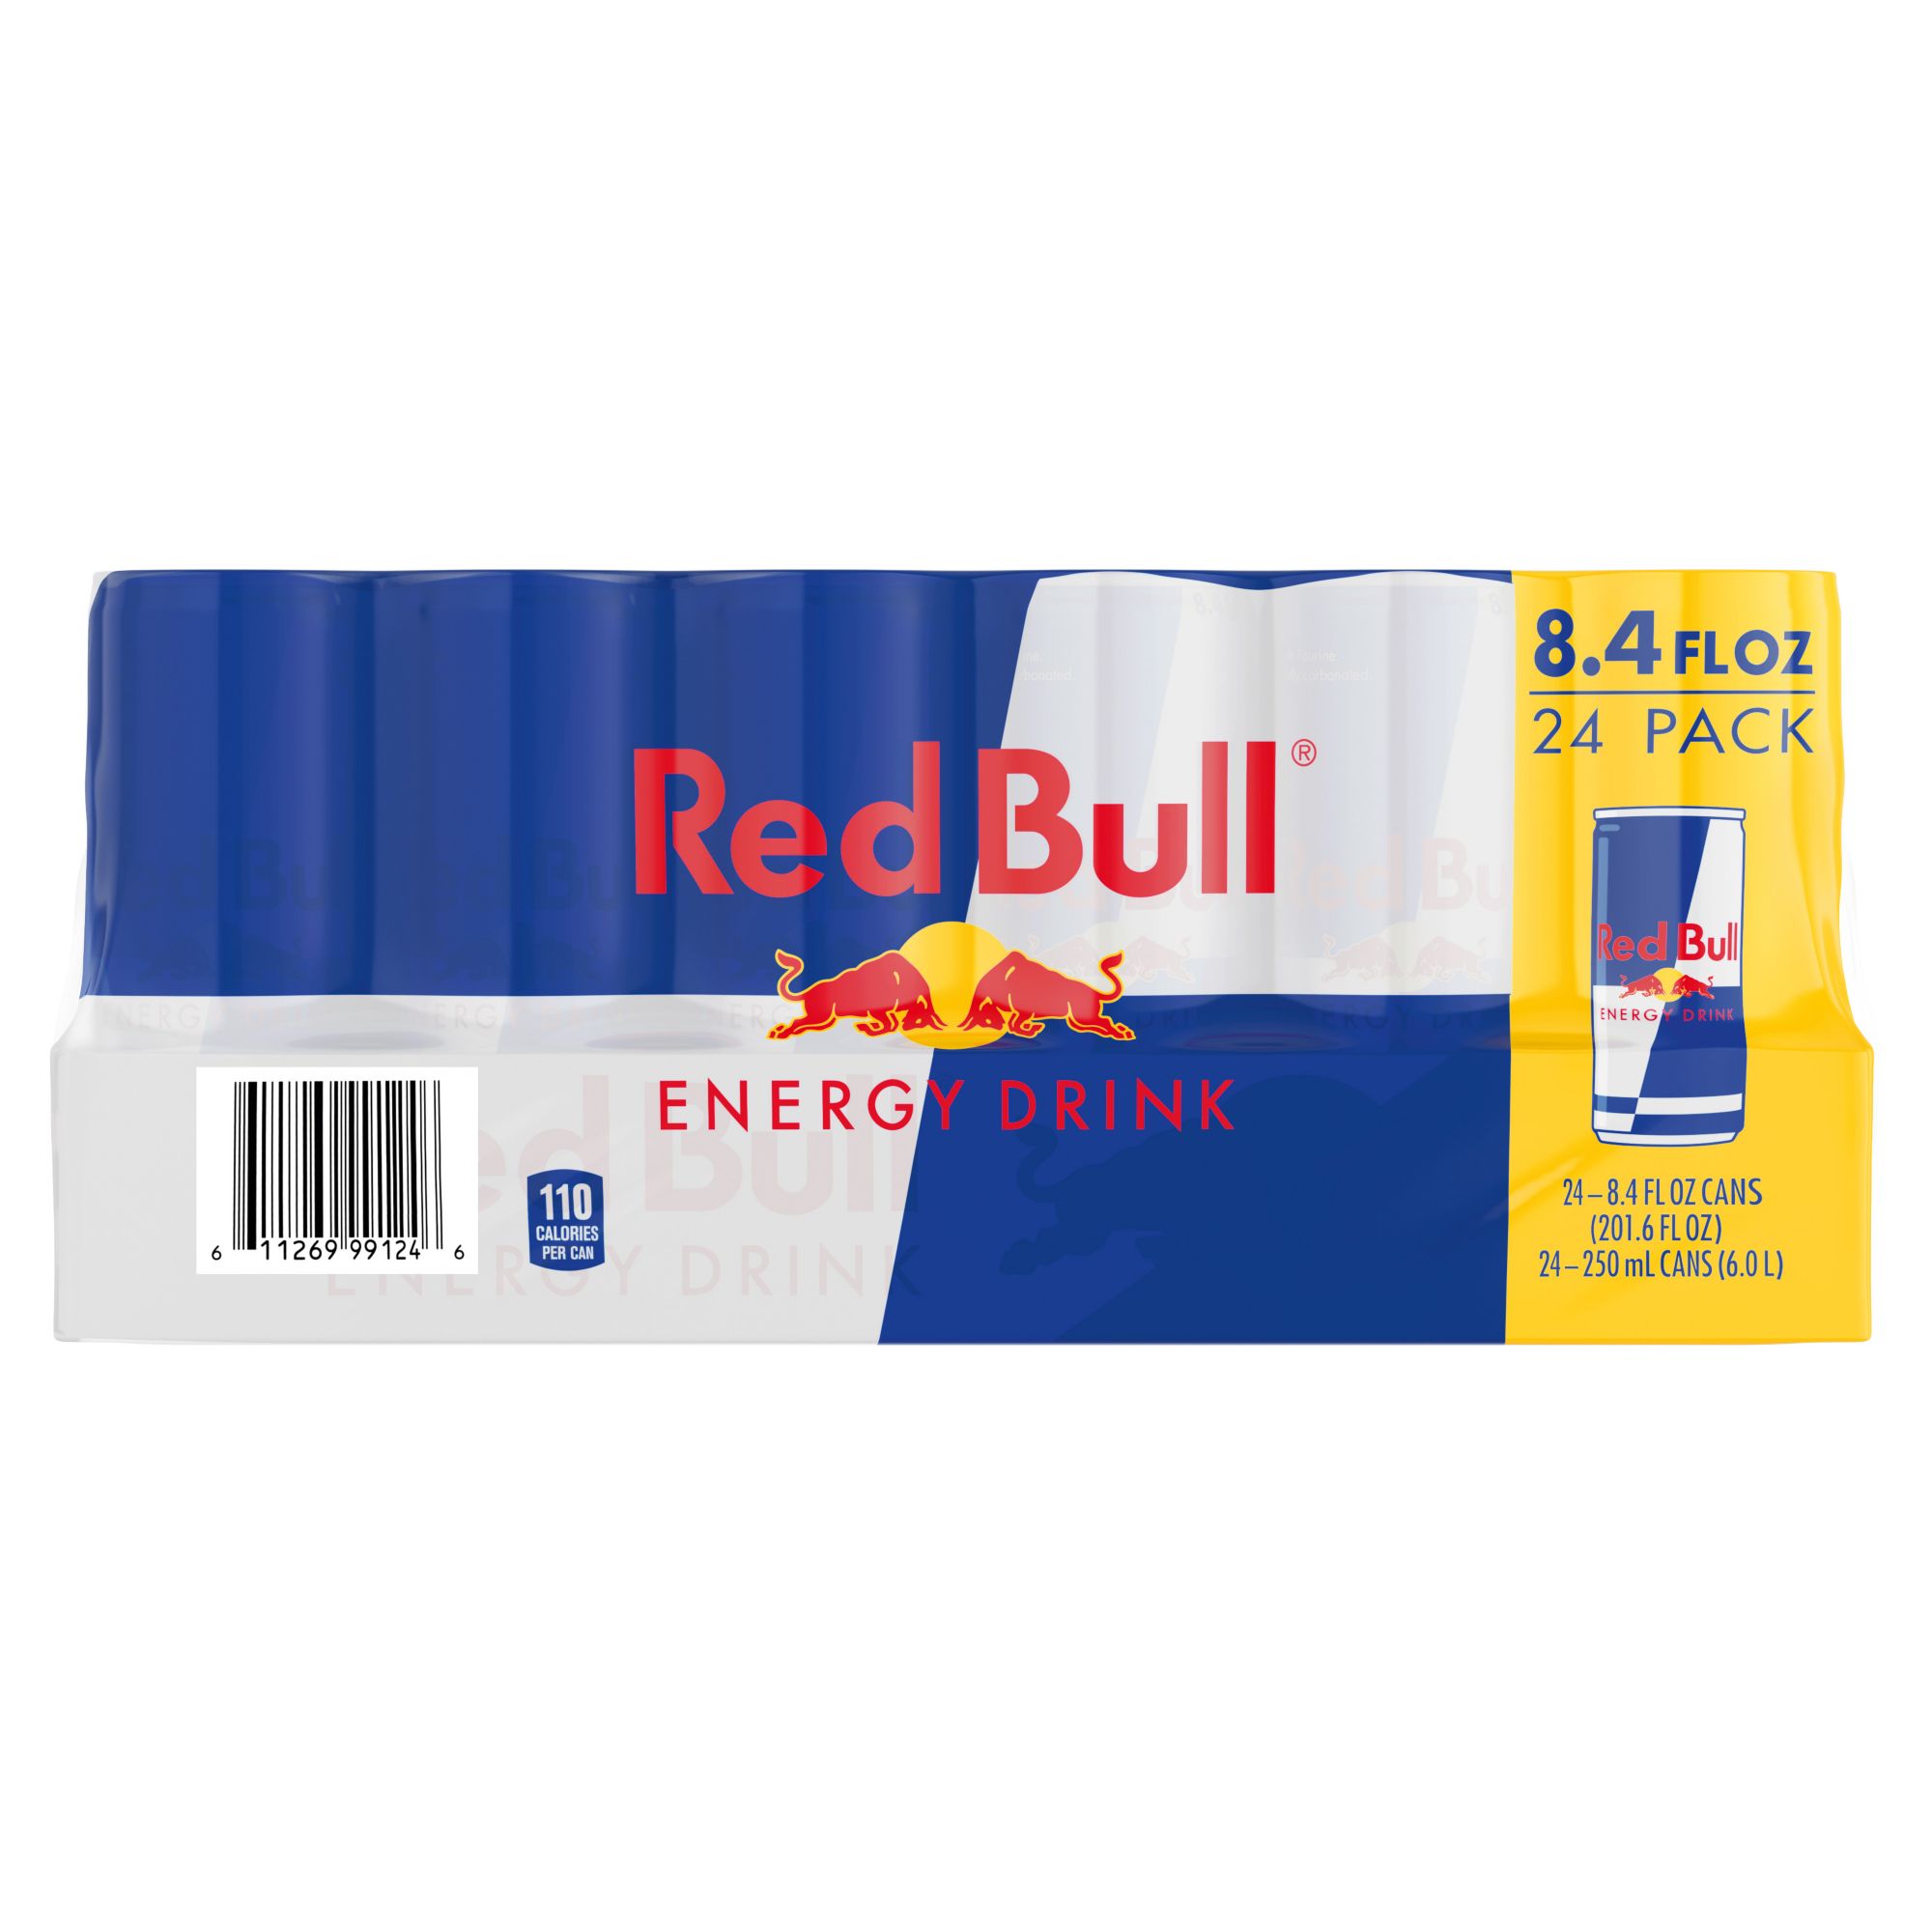 Red Bull Energy Drink, 24 ct./8.4 oz.